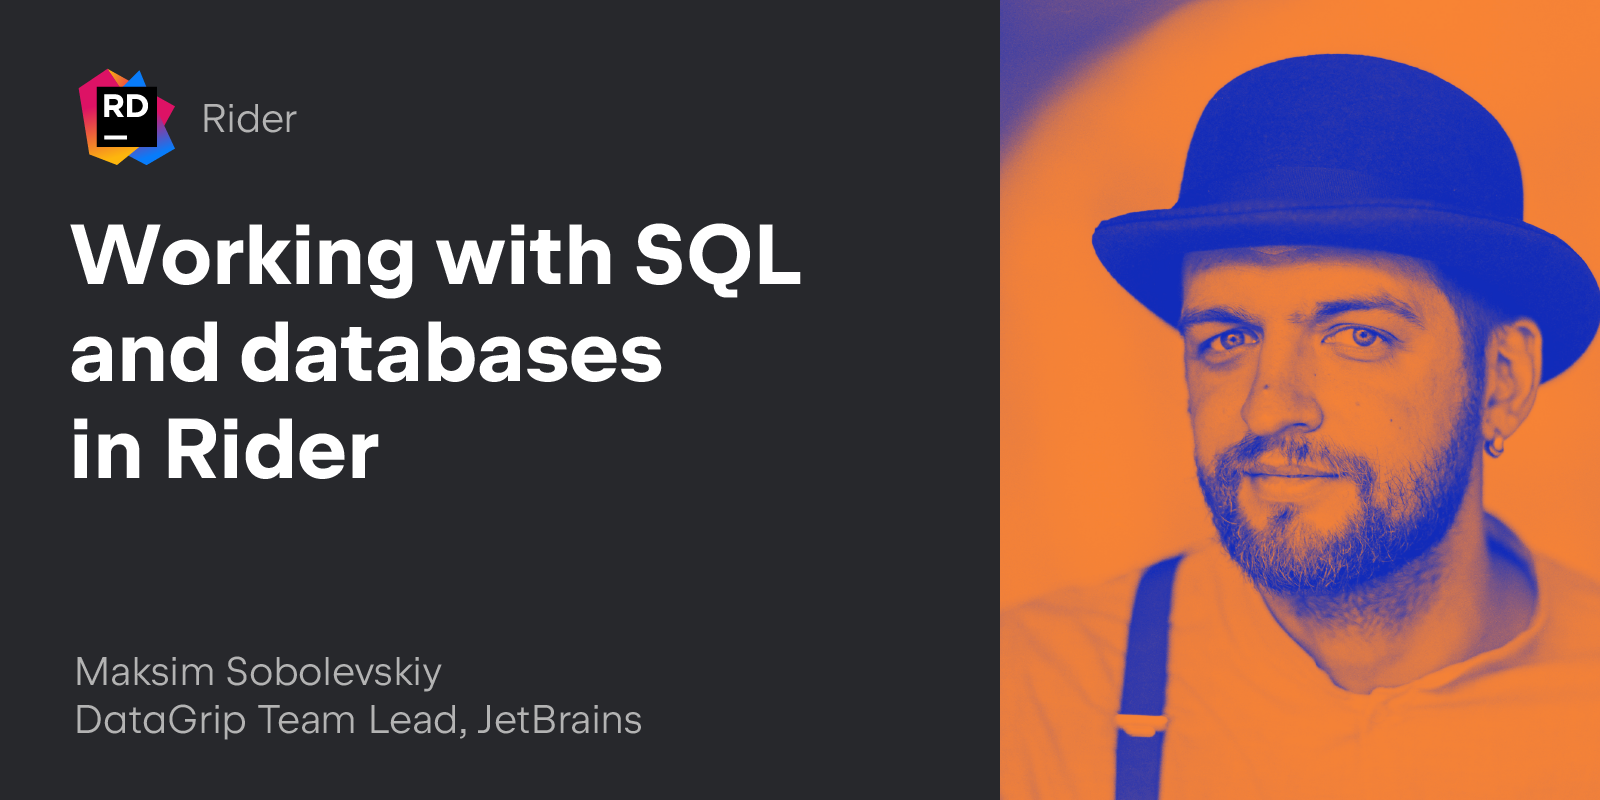 Register for the working with sql and databases in Rider webinar